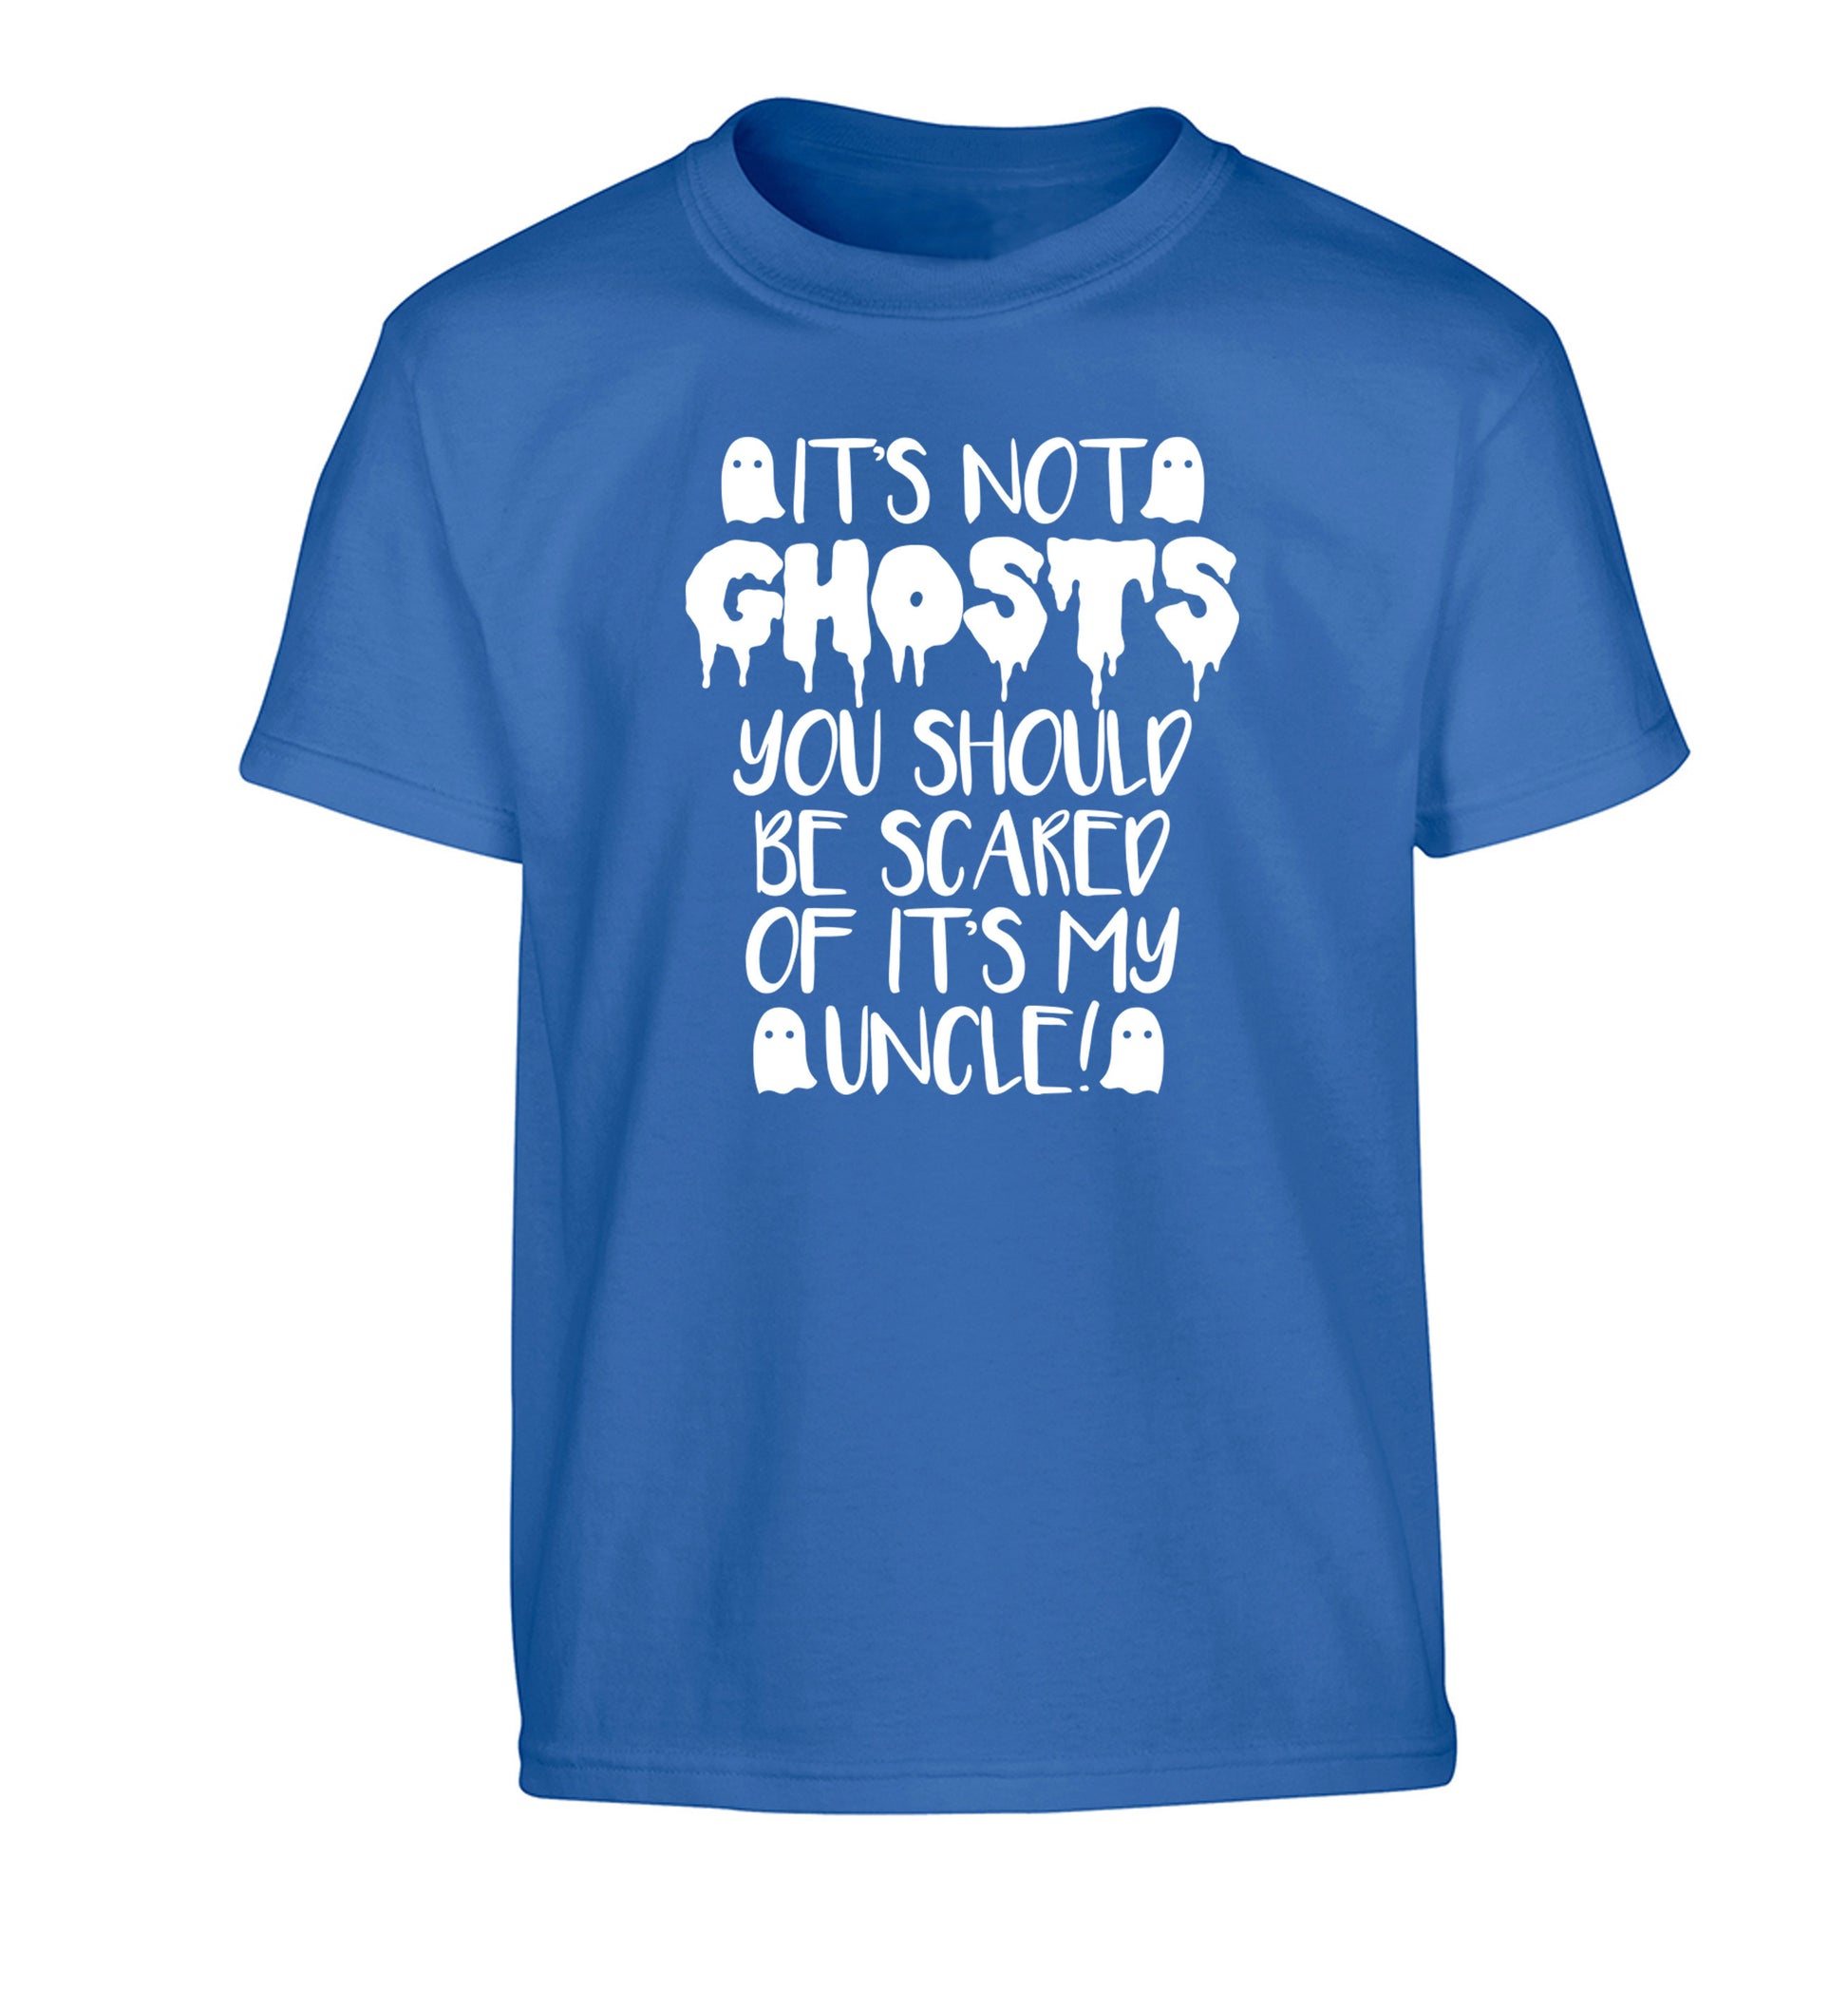 It's not ghosts you should be scared of it's my uncle! Children's blue Tshirt 12-14 Years